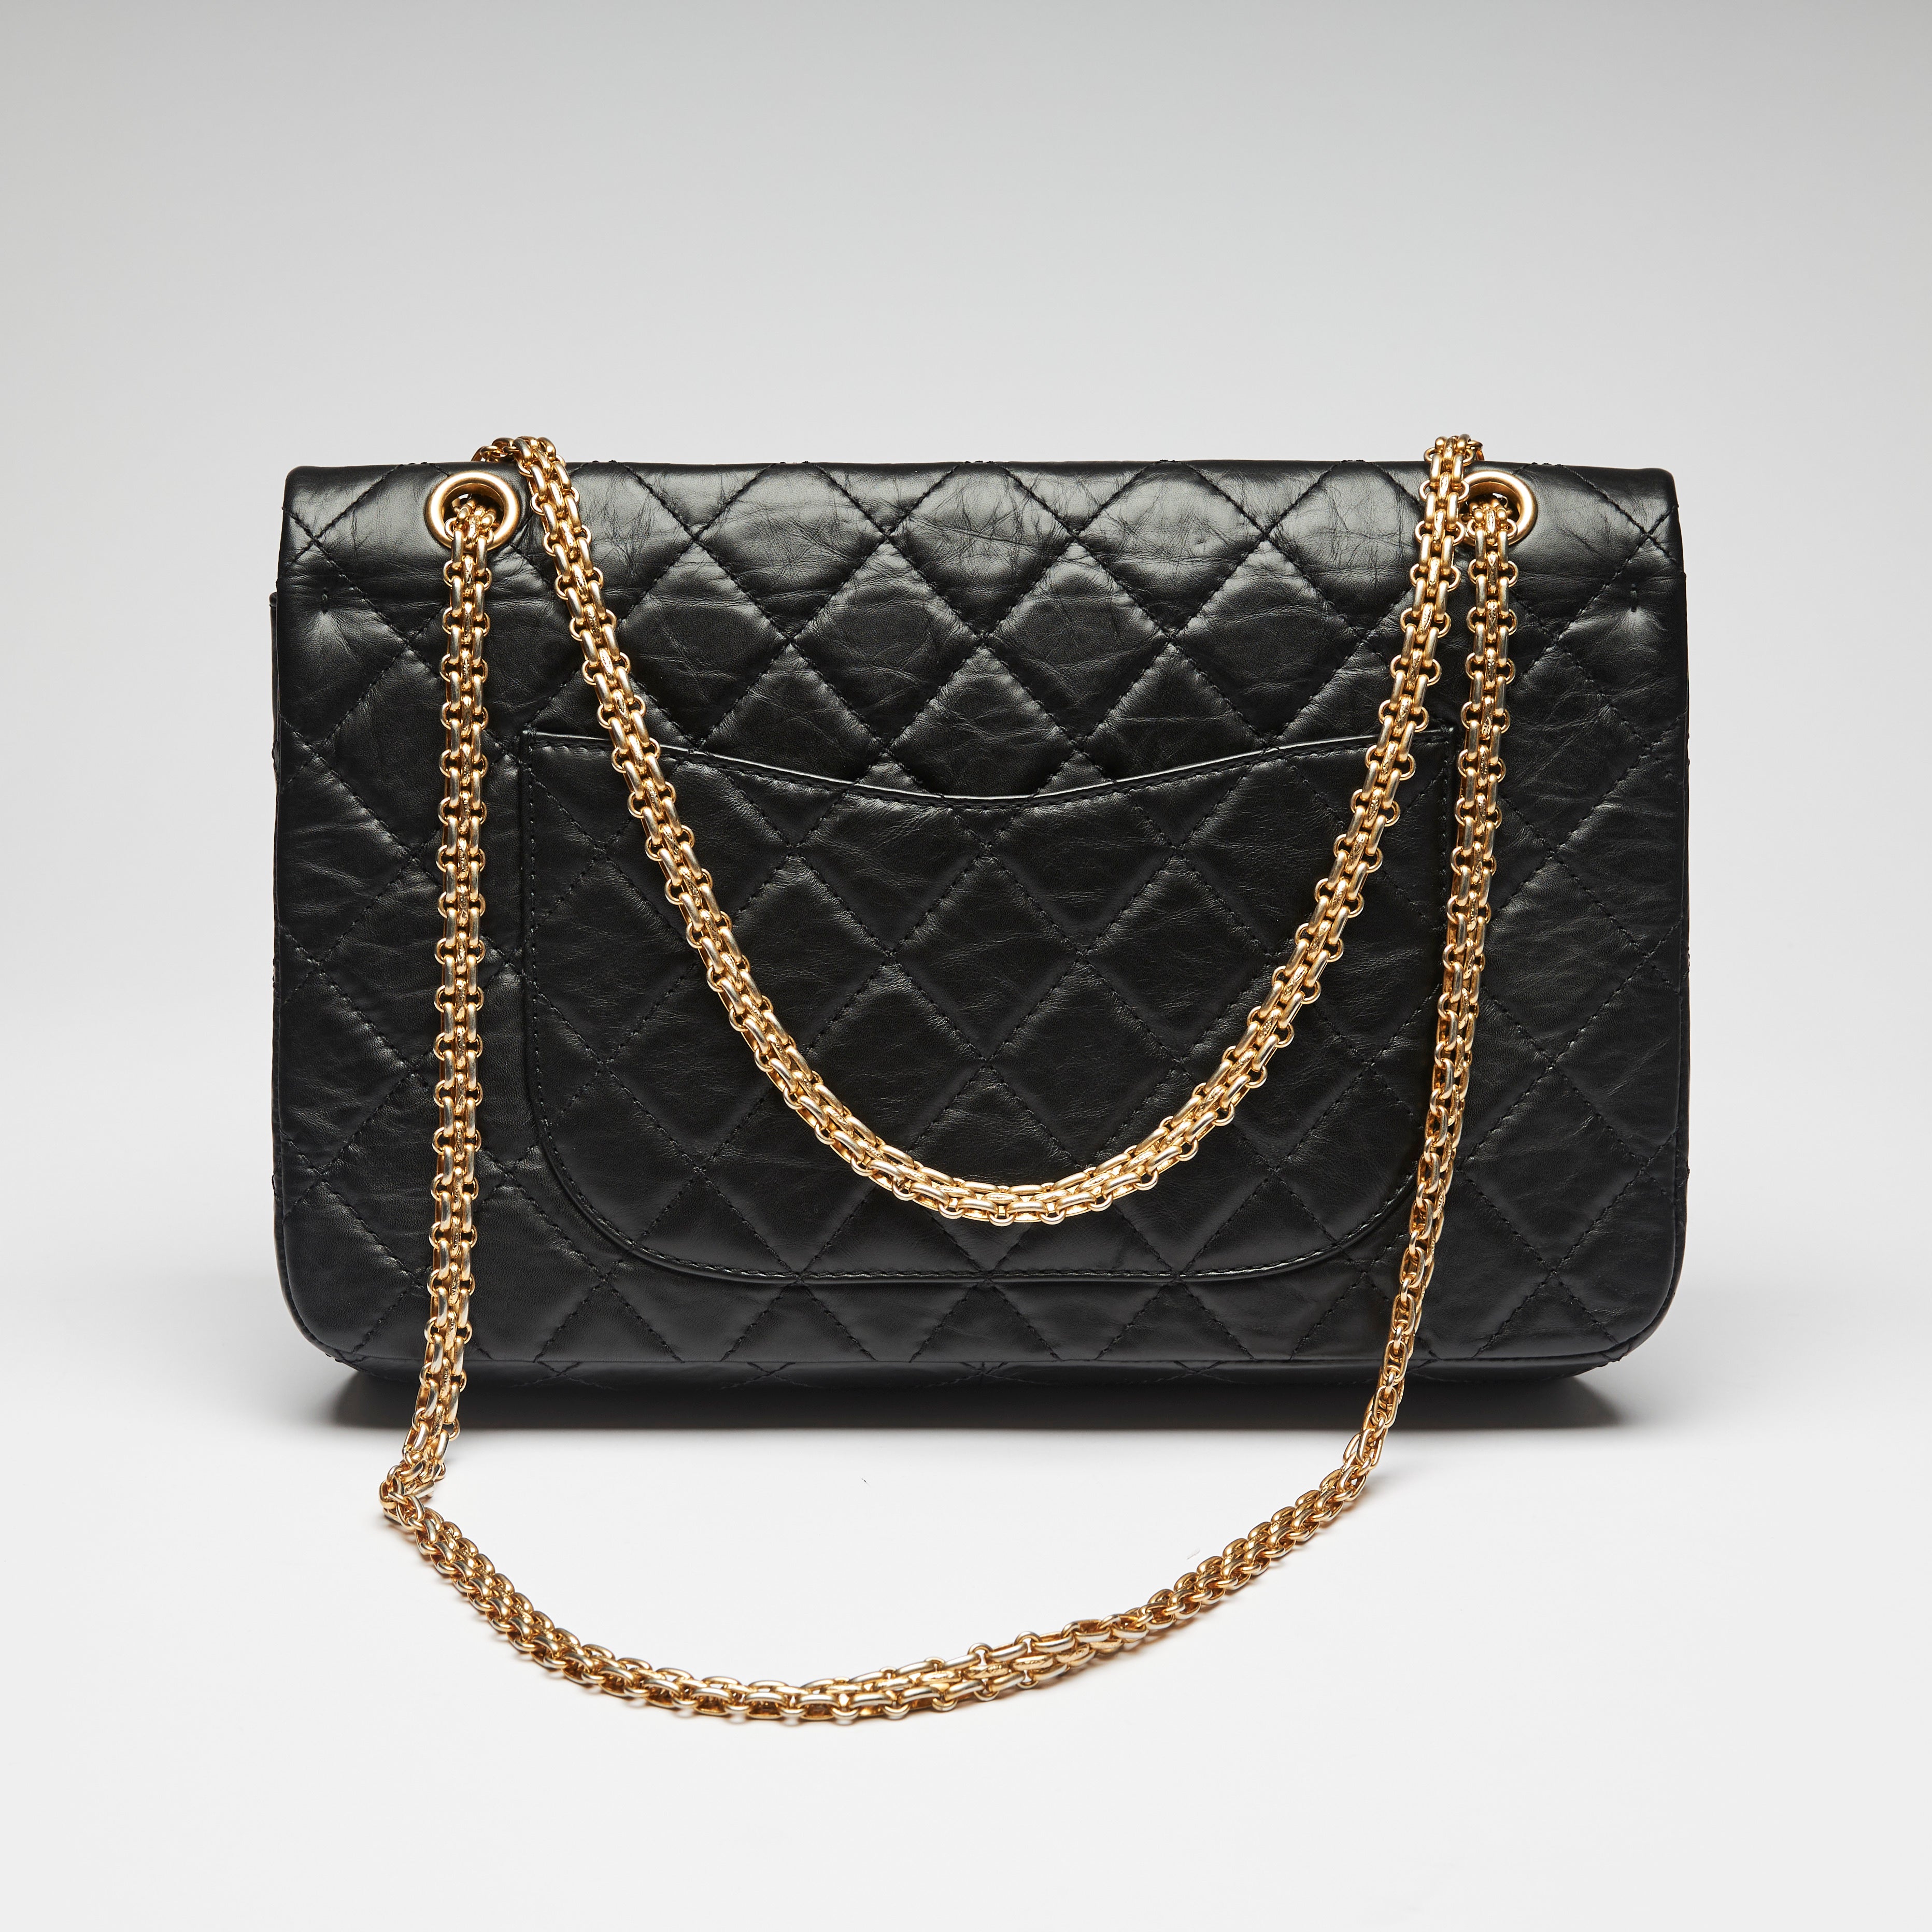 Chanel 2.55 Black Aged Calfskin Leather Double Flap Chain Bag